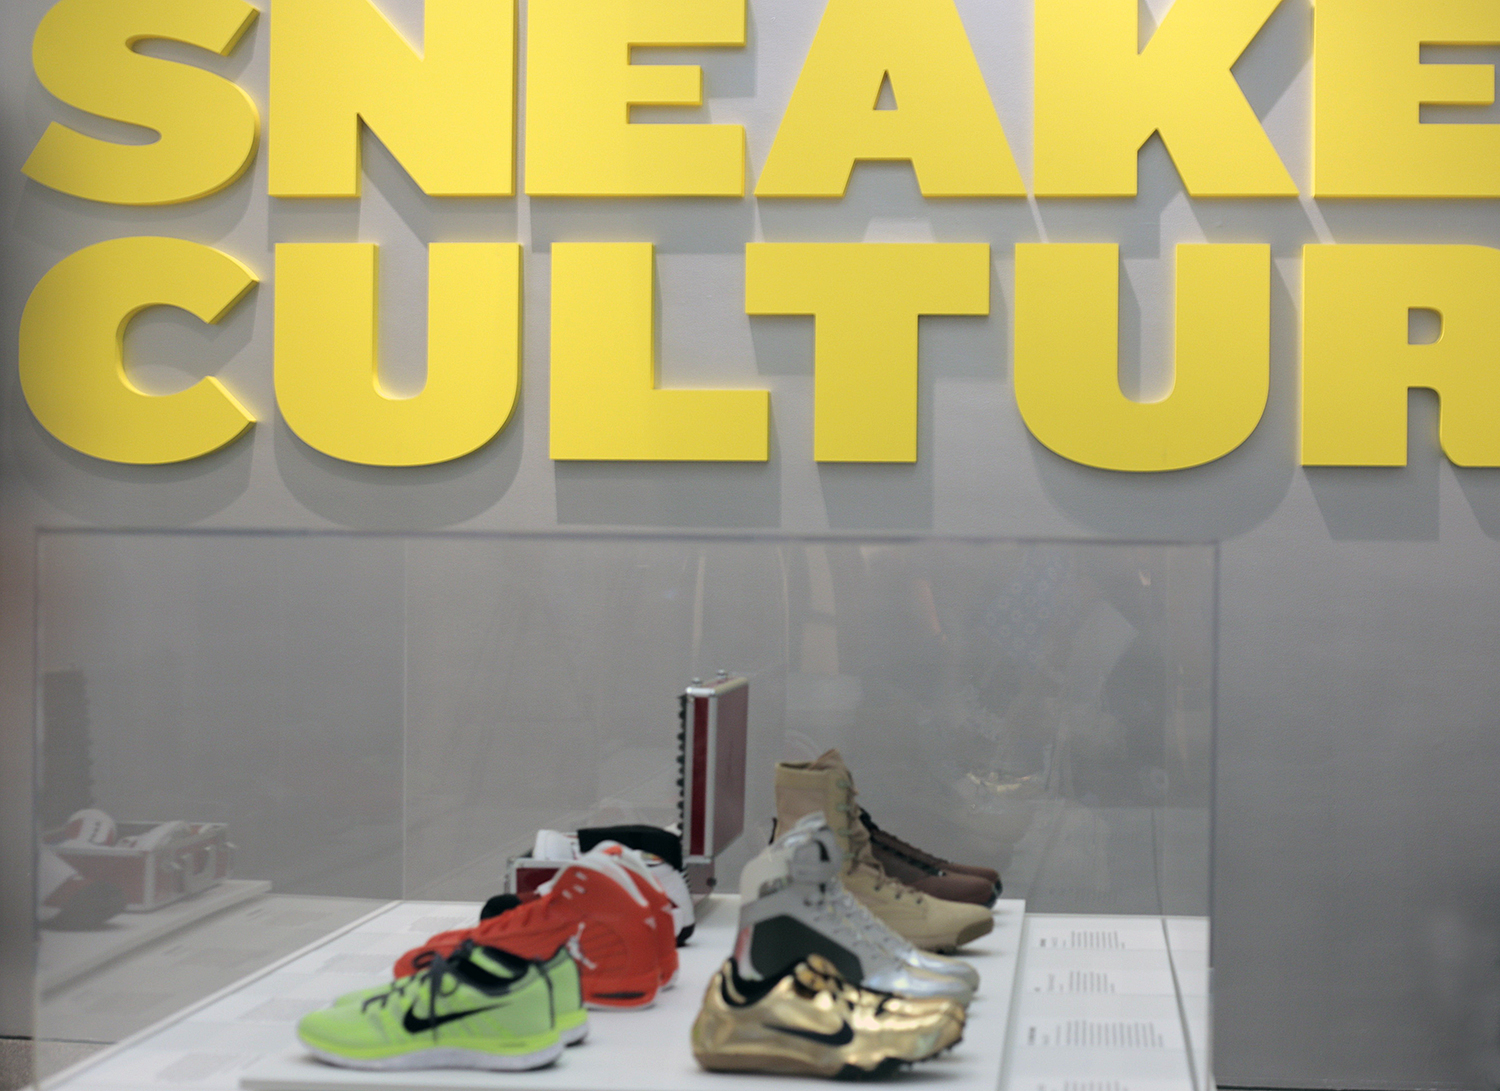 Sneaker Culture displayed at Brooklyn Museum - An exhibition for